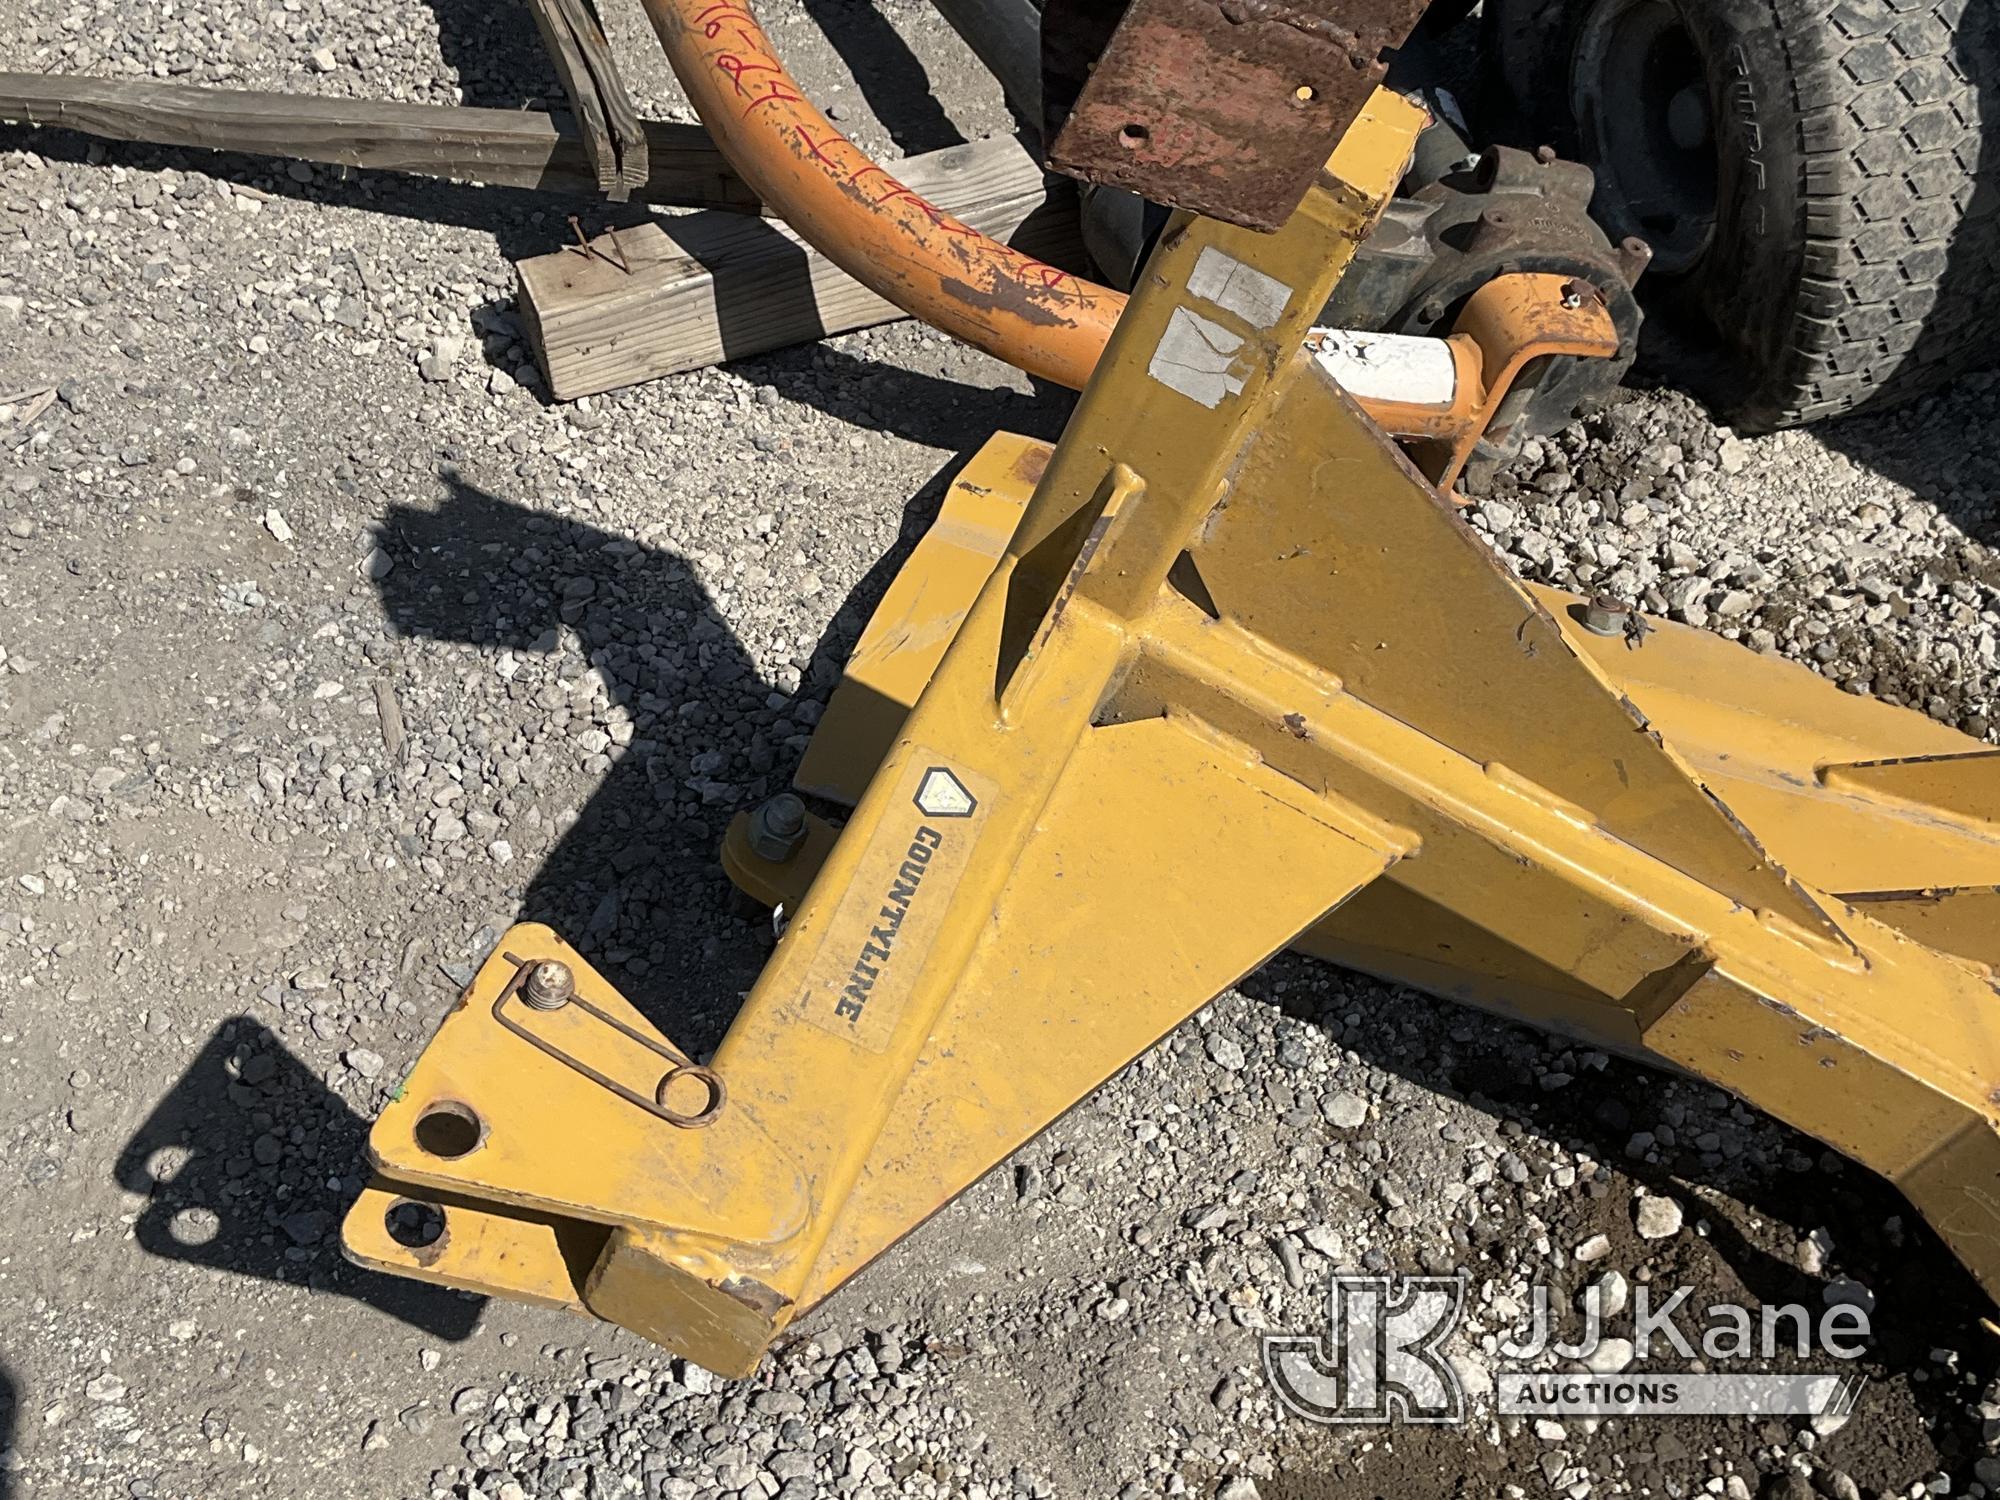 (Jurupa Valley, CA) 3 Point Blade No year provided on consignment form. SL Operation Unknown